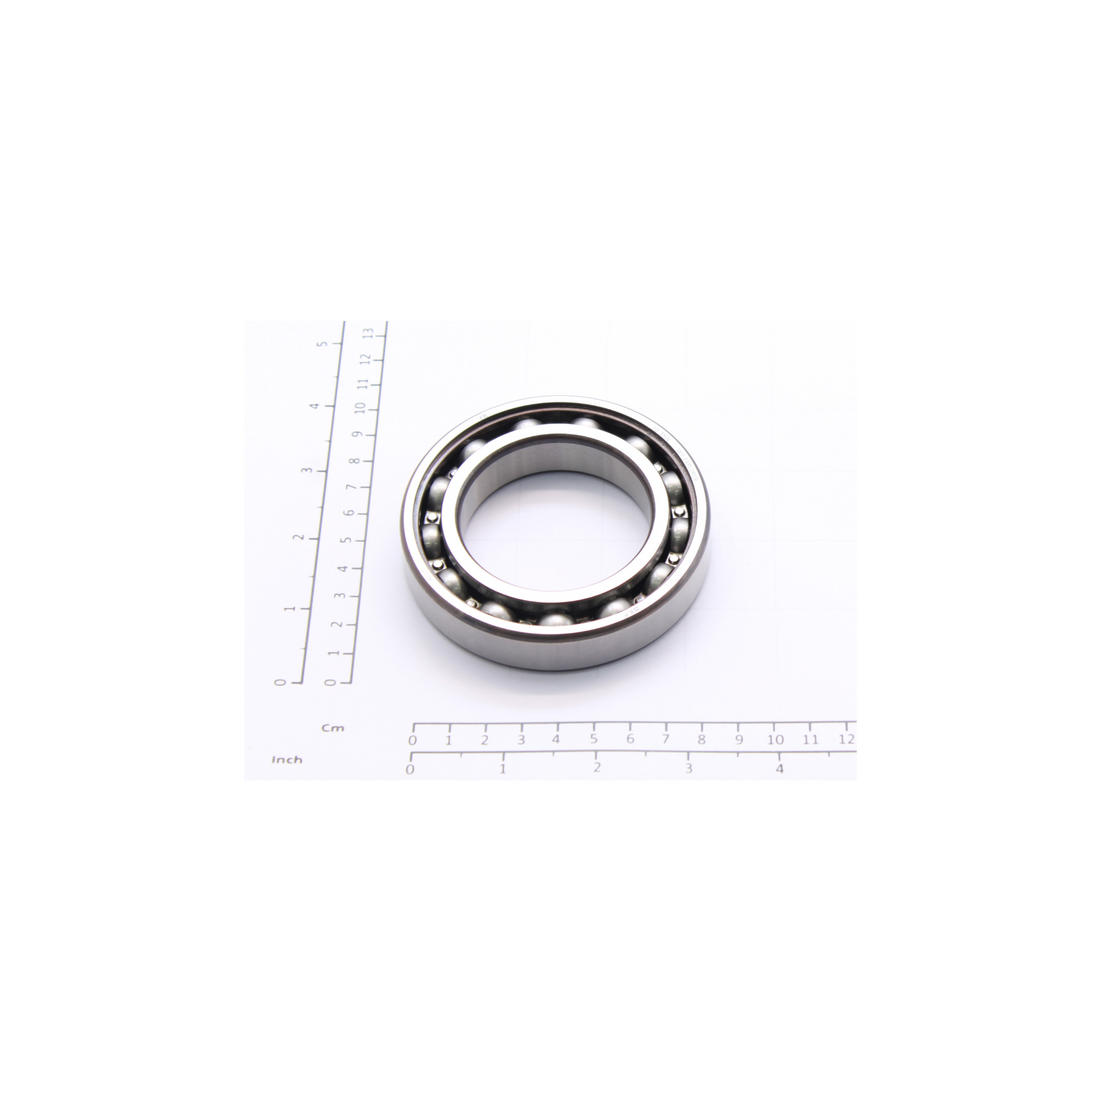 R&M Parts - Deep Groove Ball Bearing, Part Number: 52296112